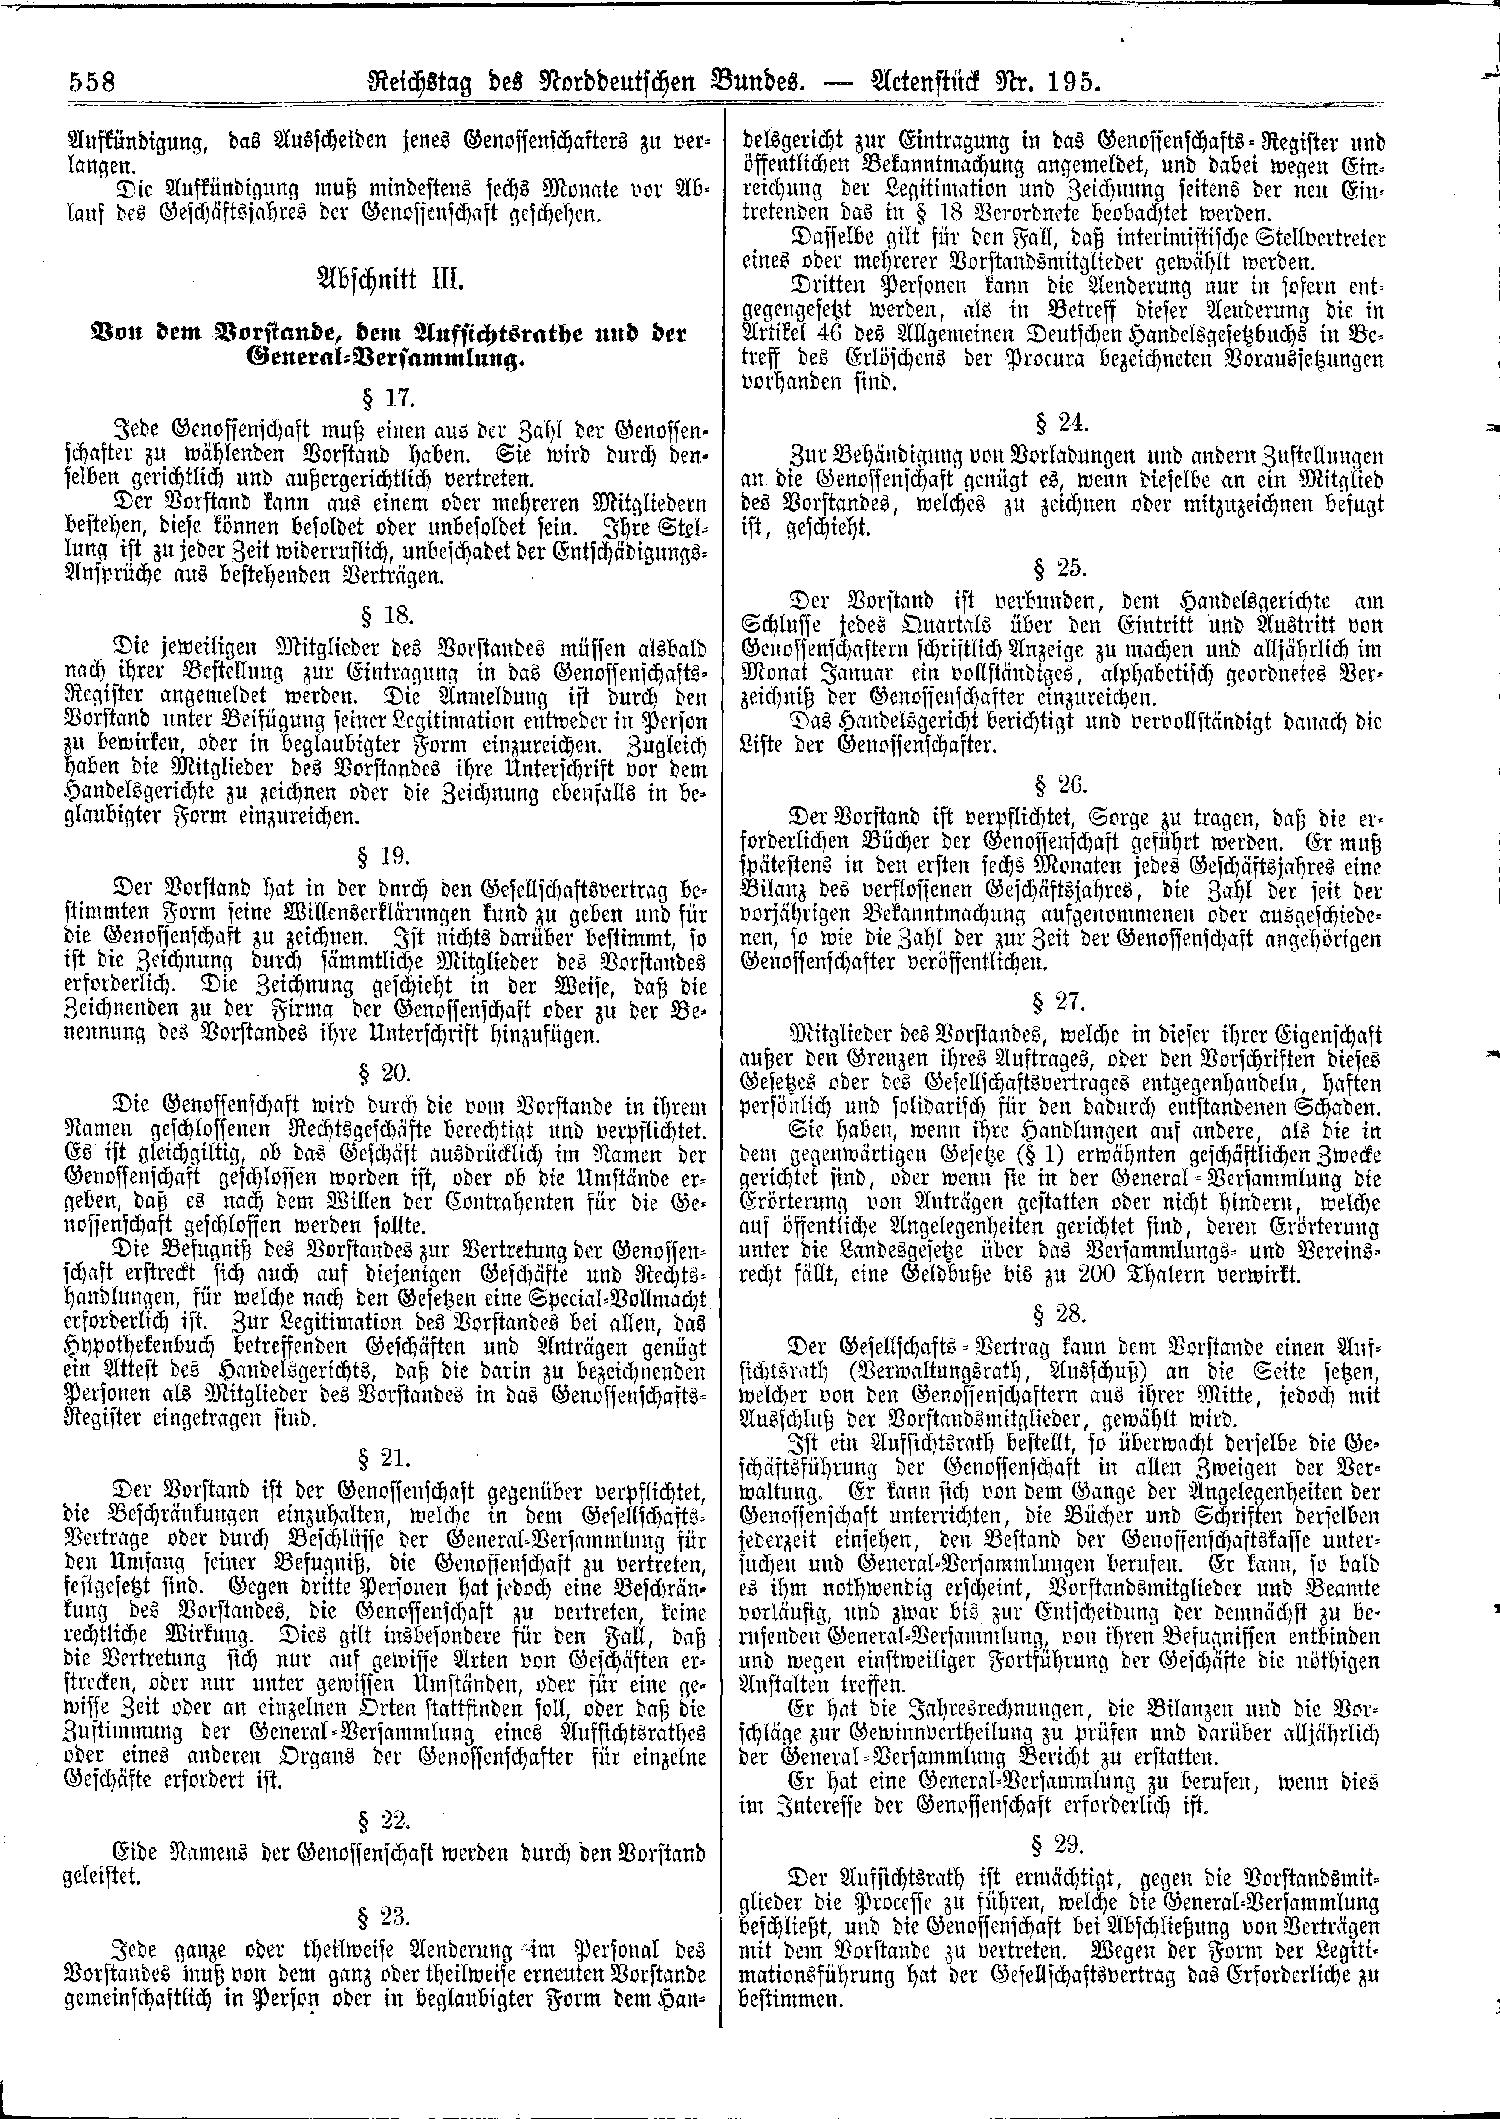 Scan of page 558